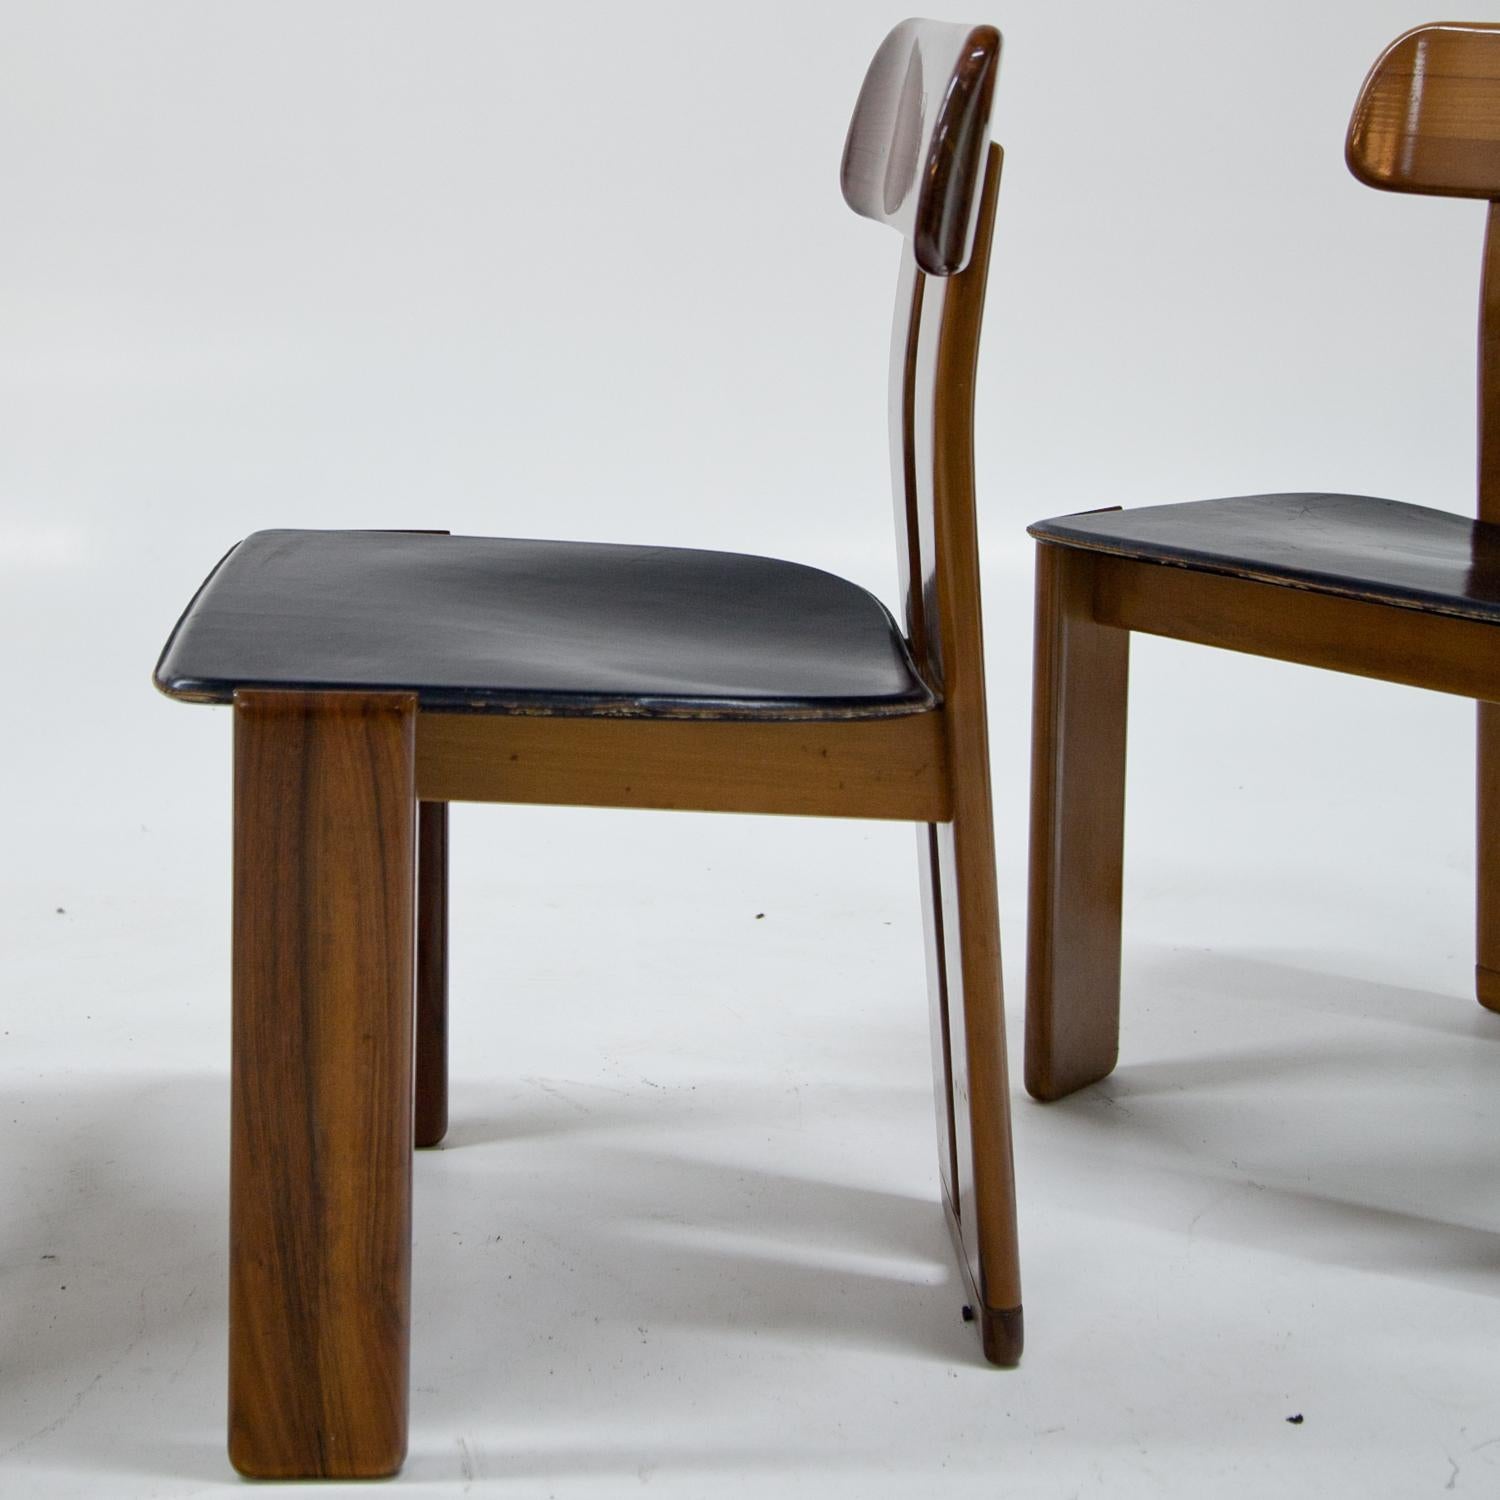 Four Chairs, Attributed to Afra & Tobia Scarpa for Maxalto, Italy, 1970s (Leder)